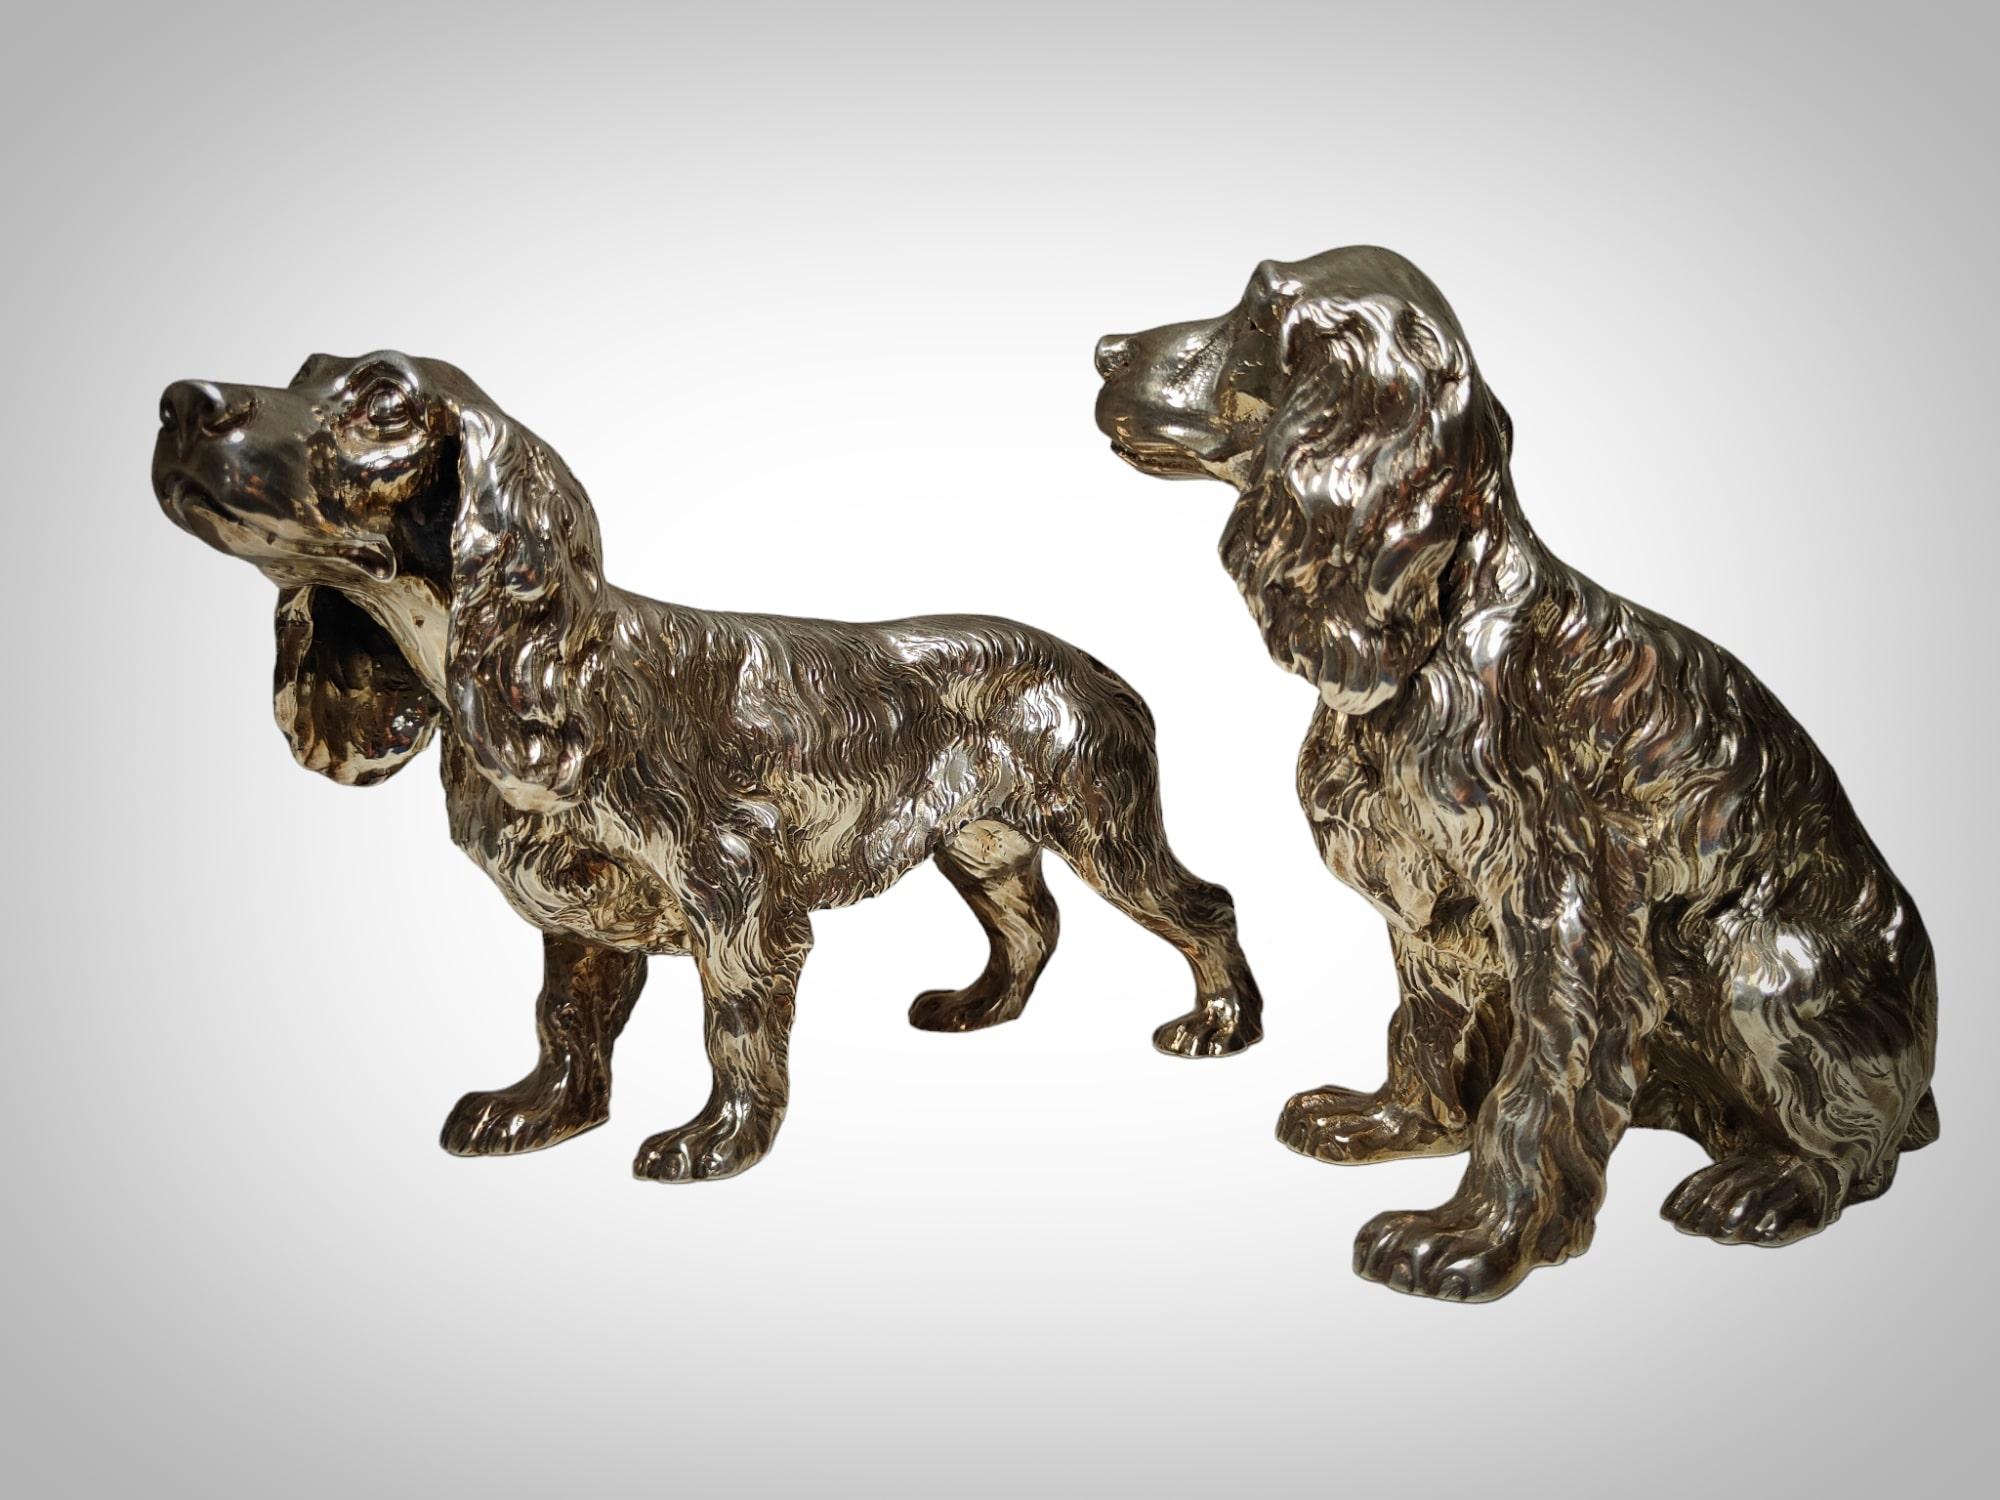 Exquisite Pair of Italian Solid Silver Cocker Spaniel Dogs For Sale 8